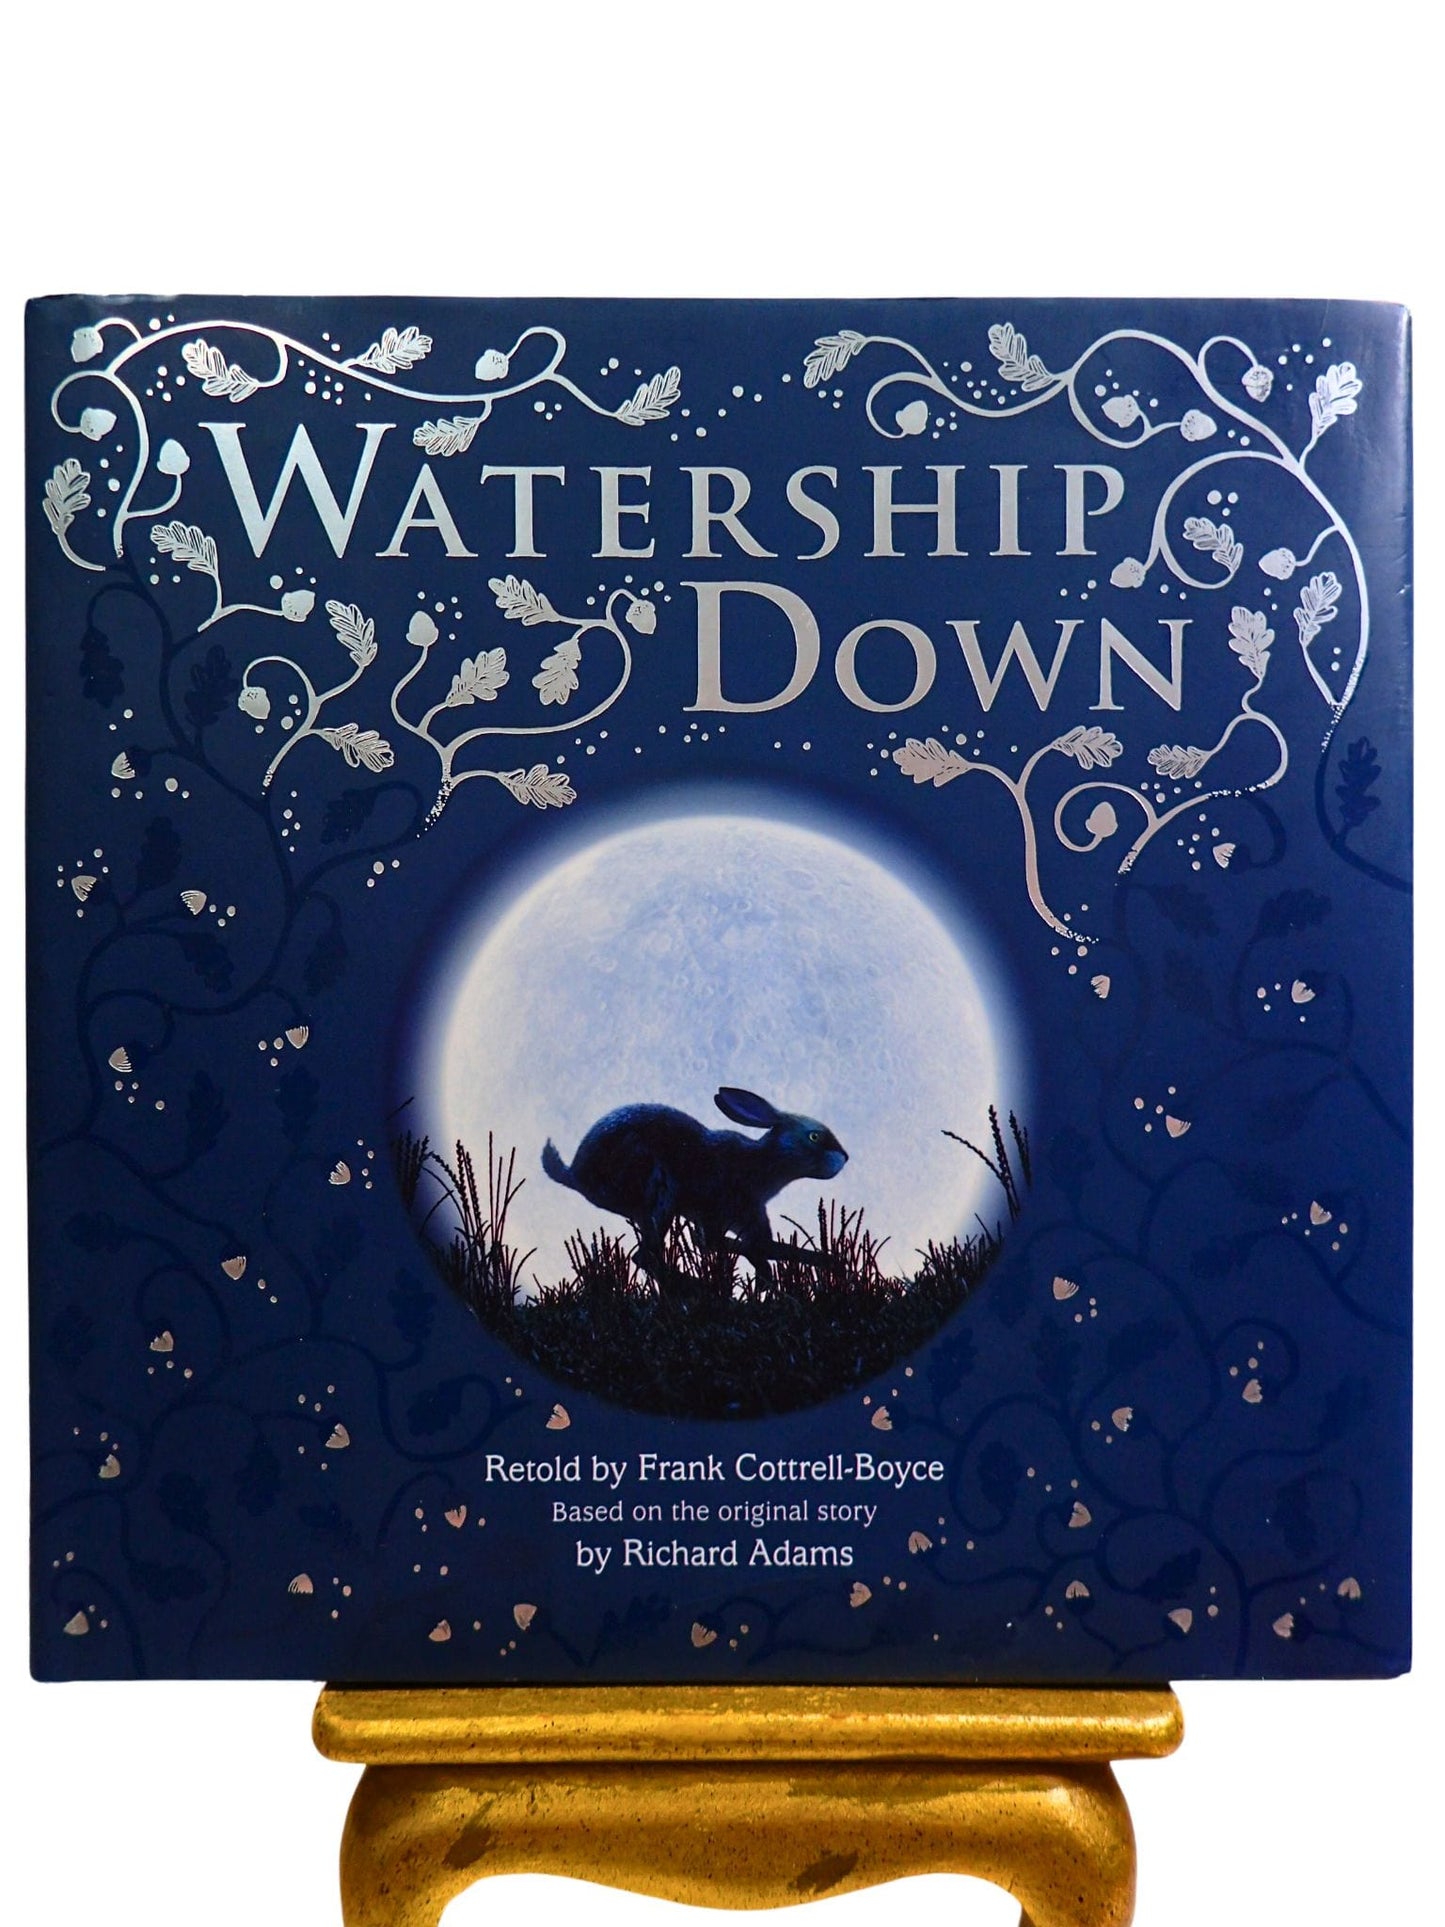 Watership Down Illustrated Children's Book Richard Adams & Cottrell-Boyce First Edition